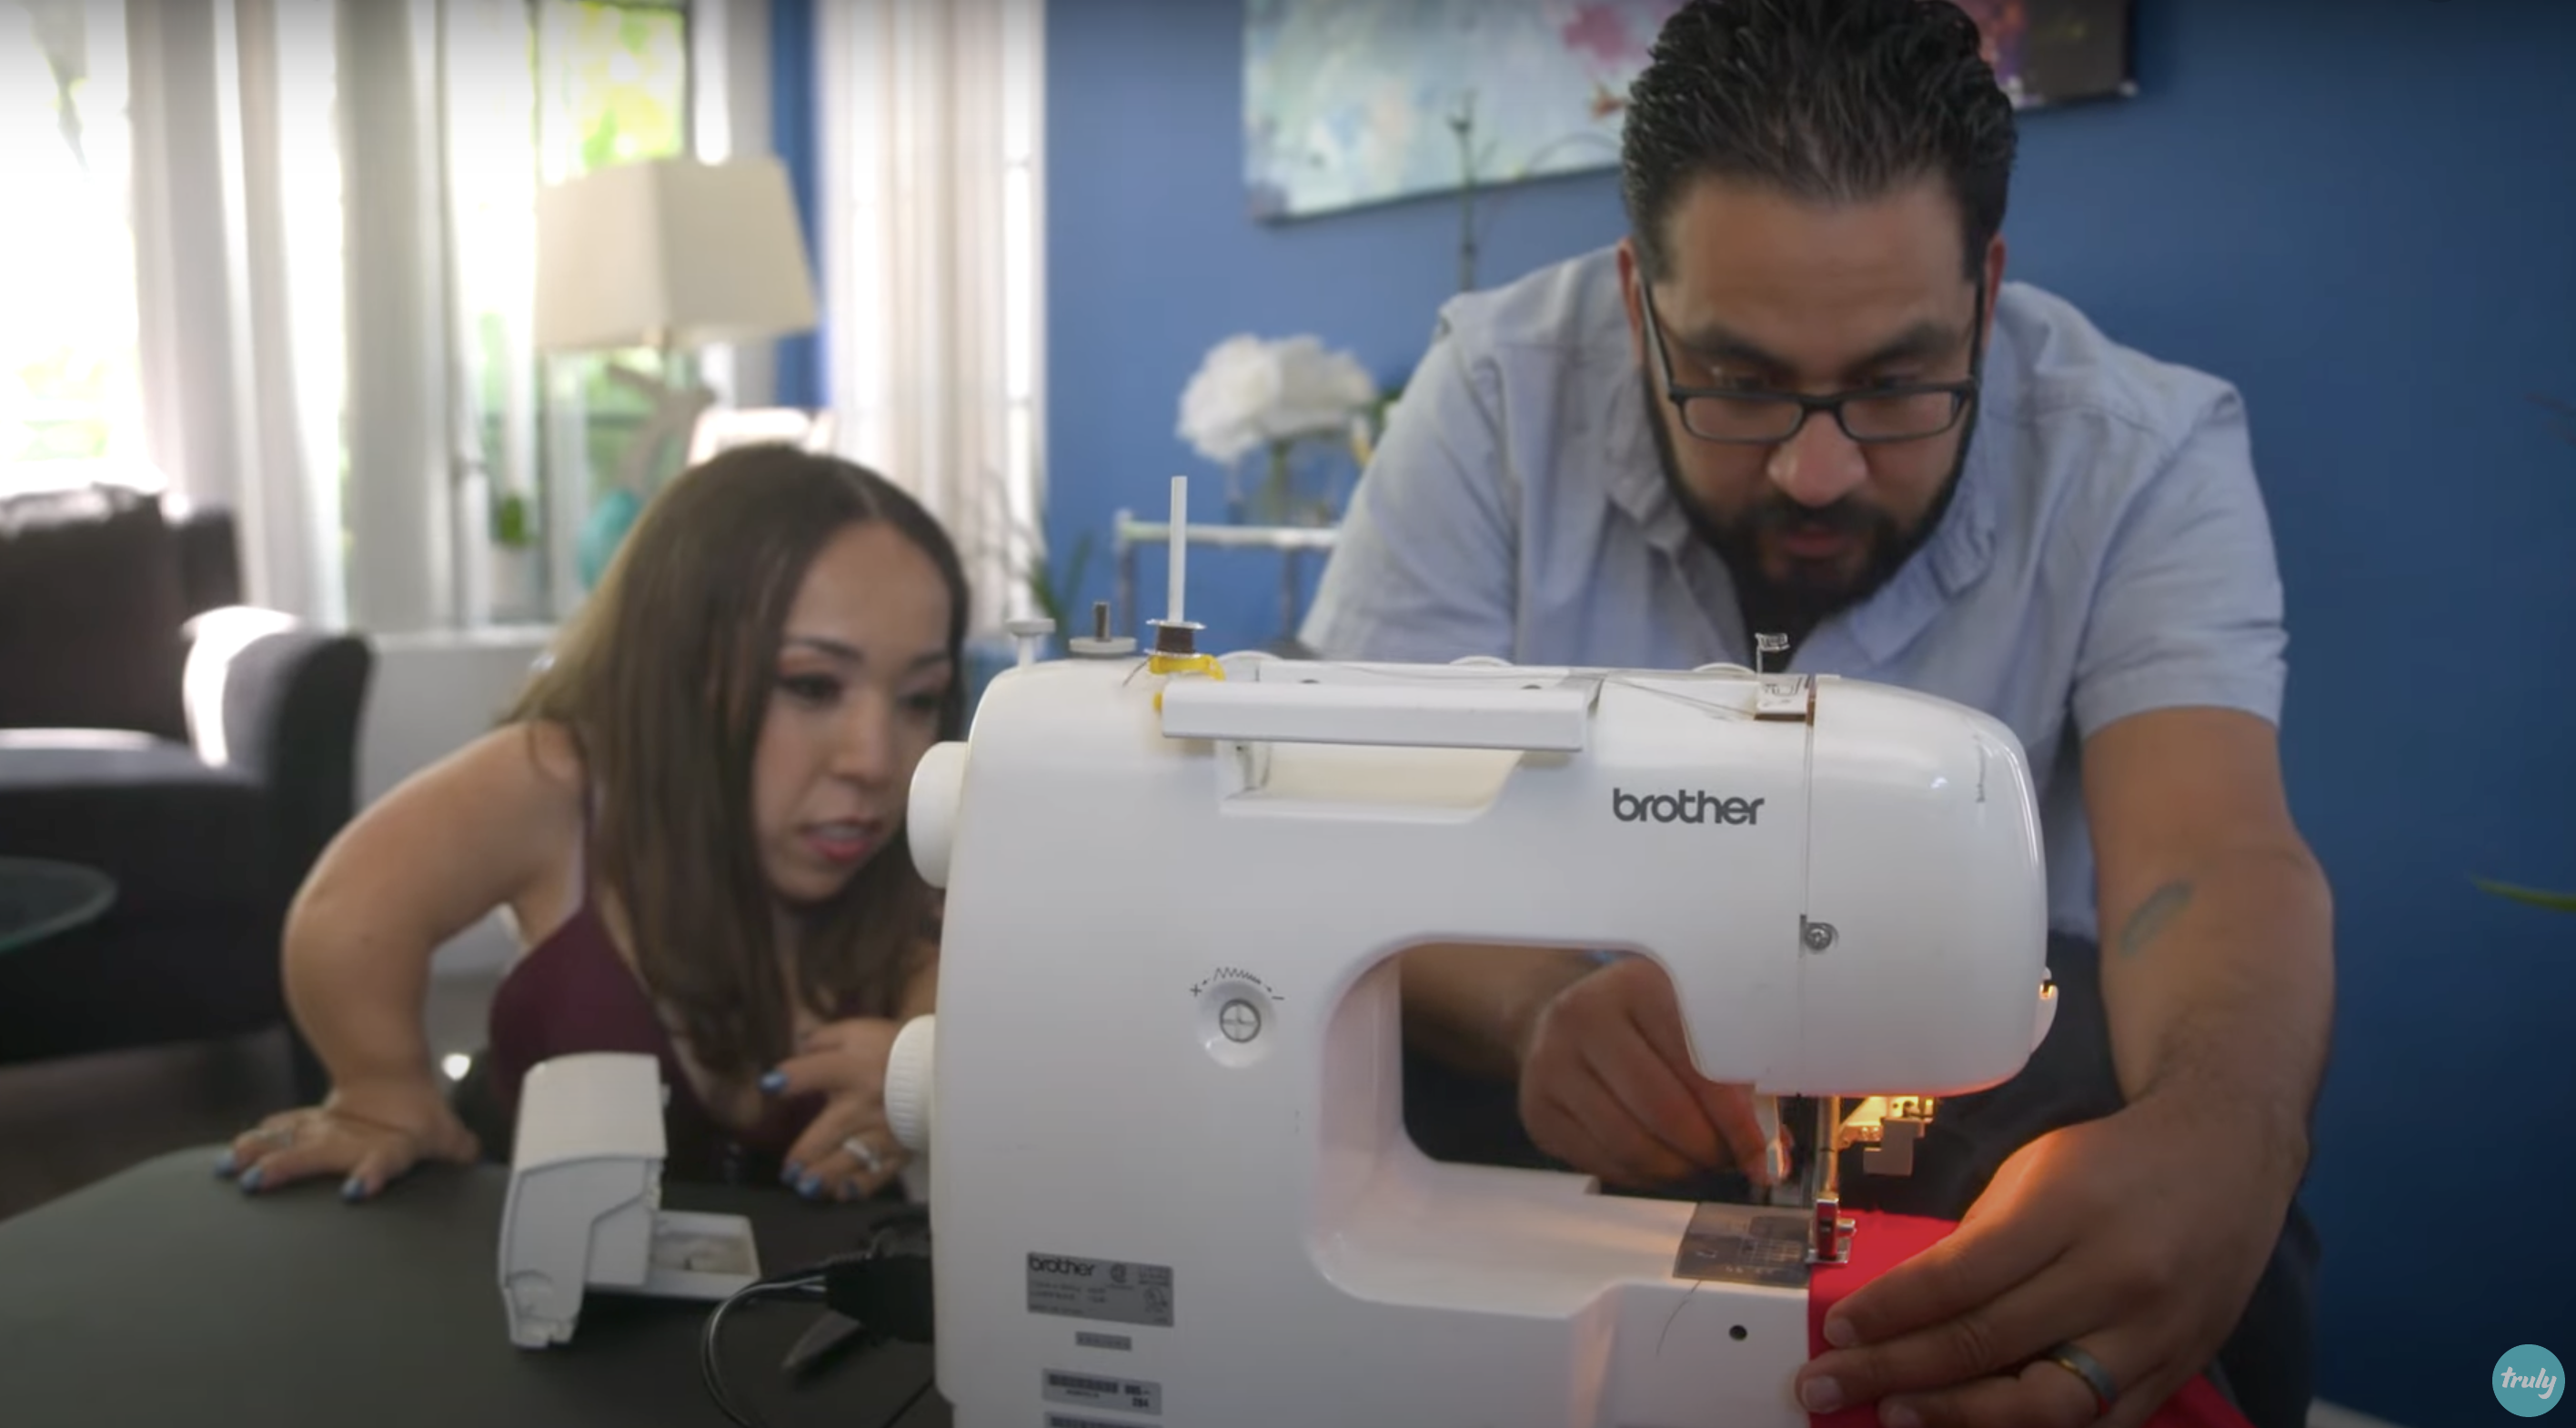 Bryan uses a sewing machine to make alterations to Yesi's shirt | Source: Youtube.com/Truly